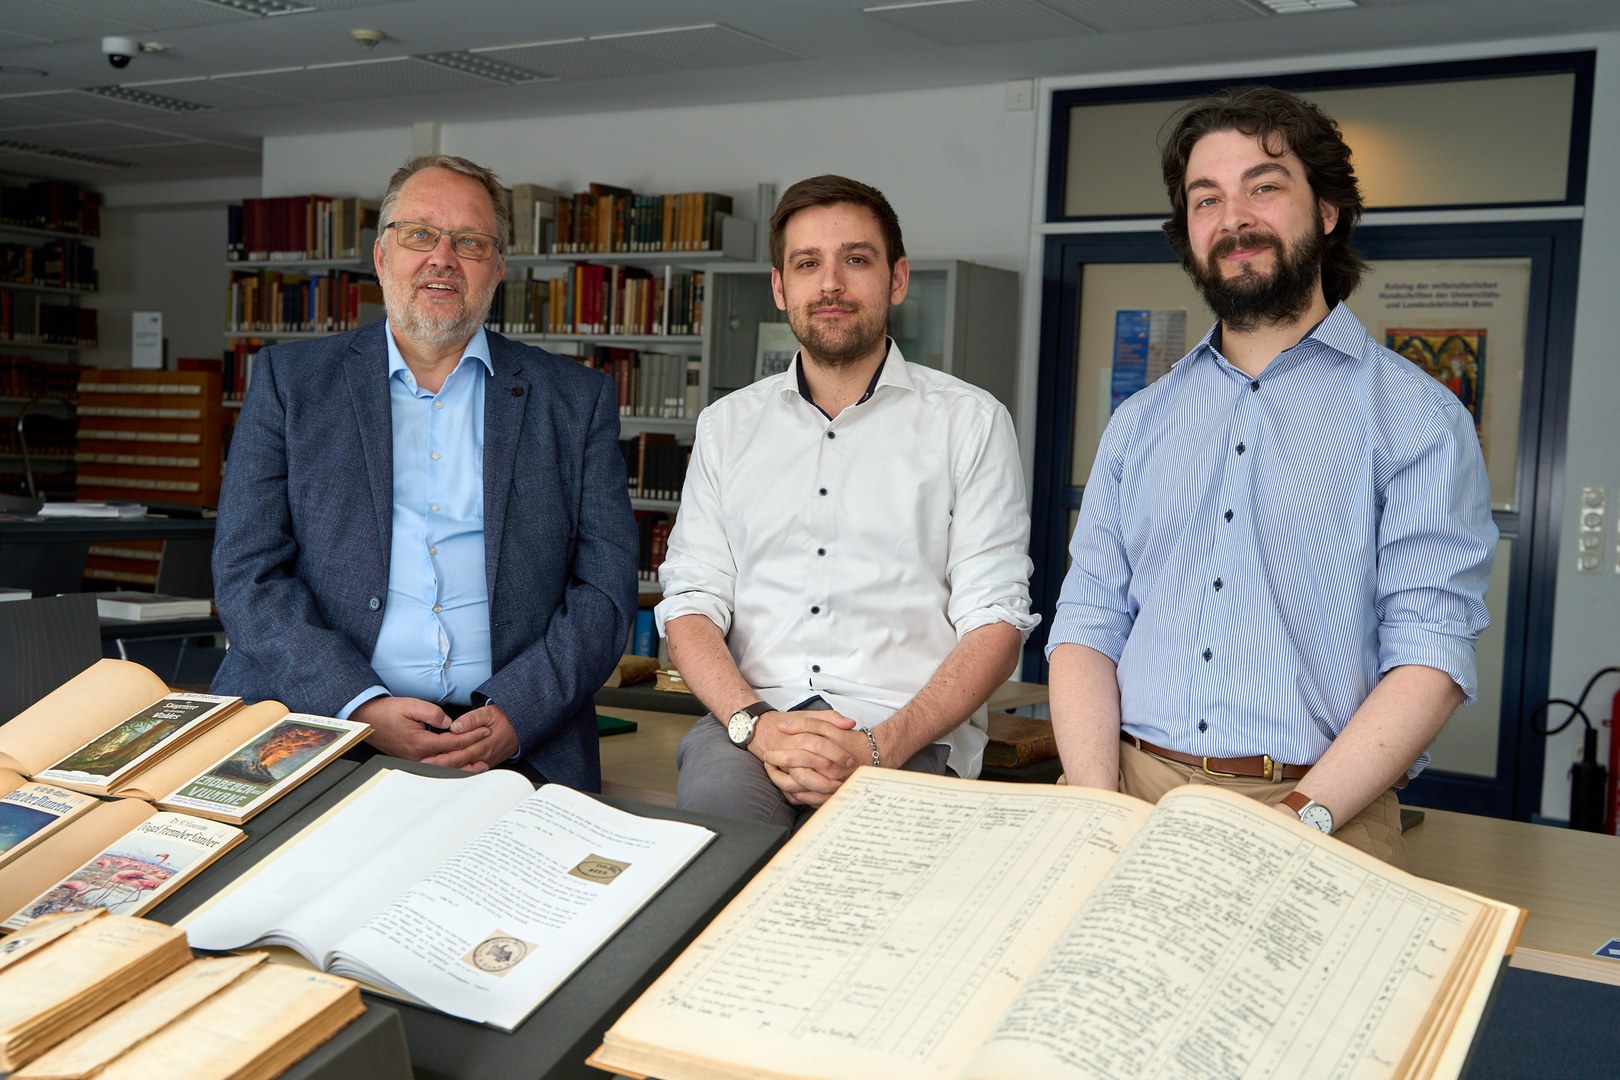 Hunting for clues: Dr. Michael Herkenhoff, Philipp-Lukas Bohr and Tobias Jansen are inspecting the USL’s holdings to see what can be restored to its rightful owners